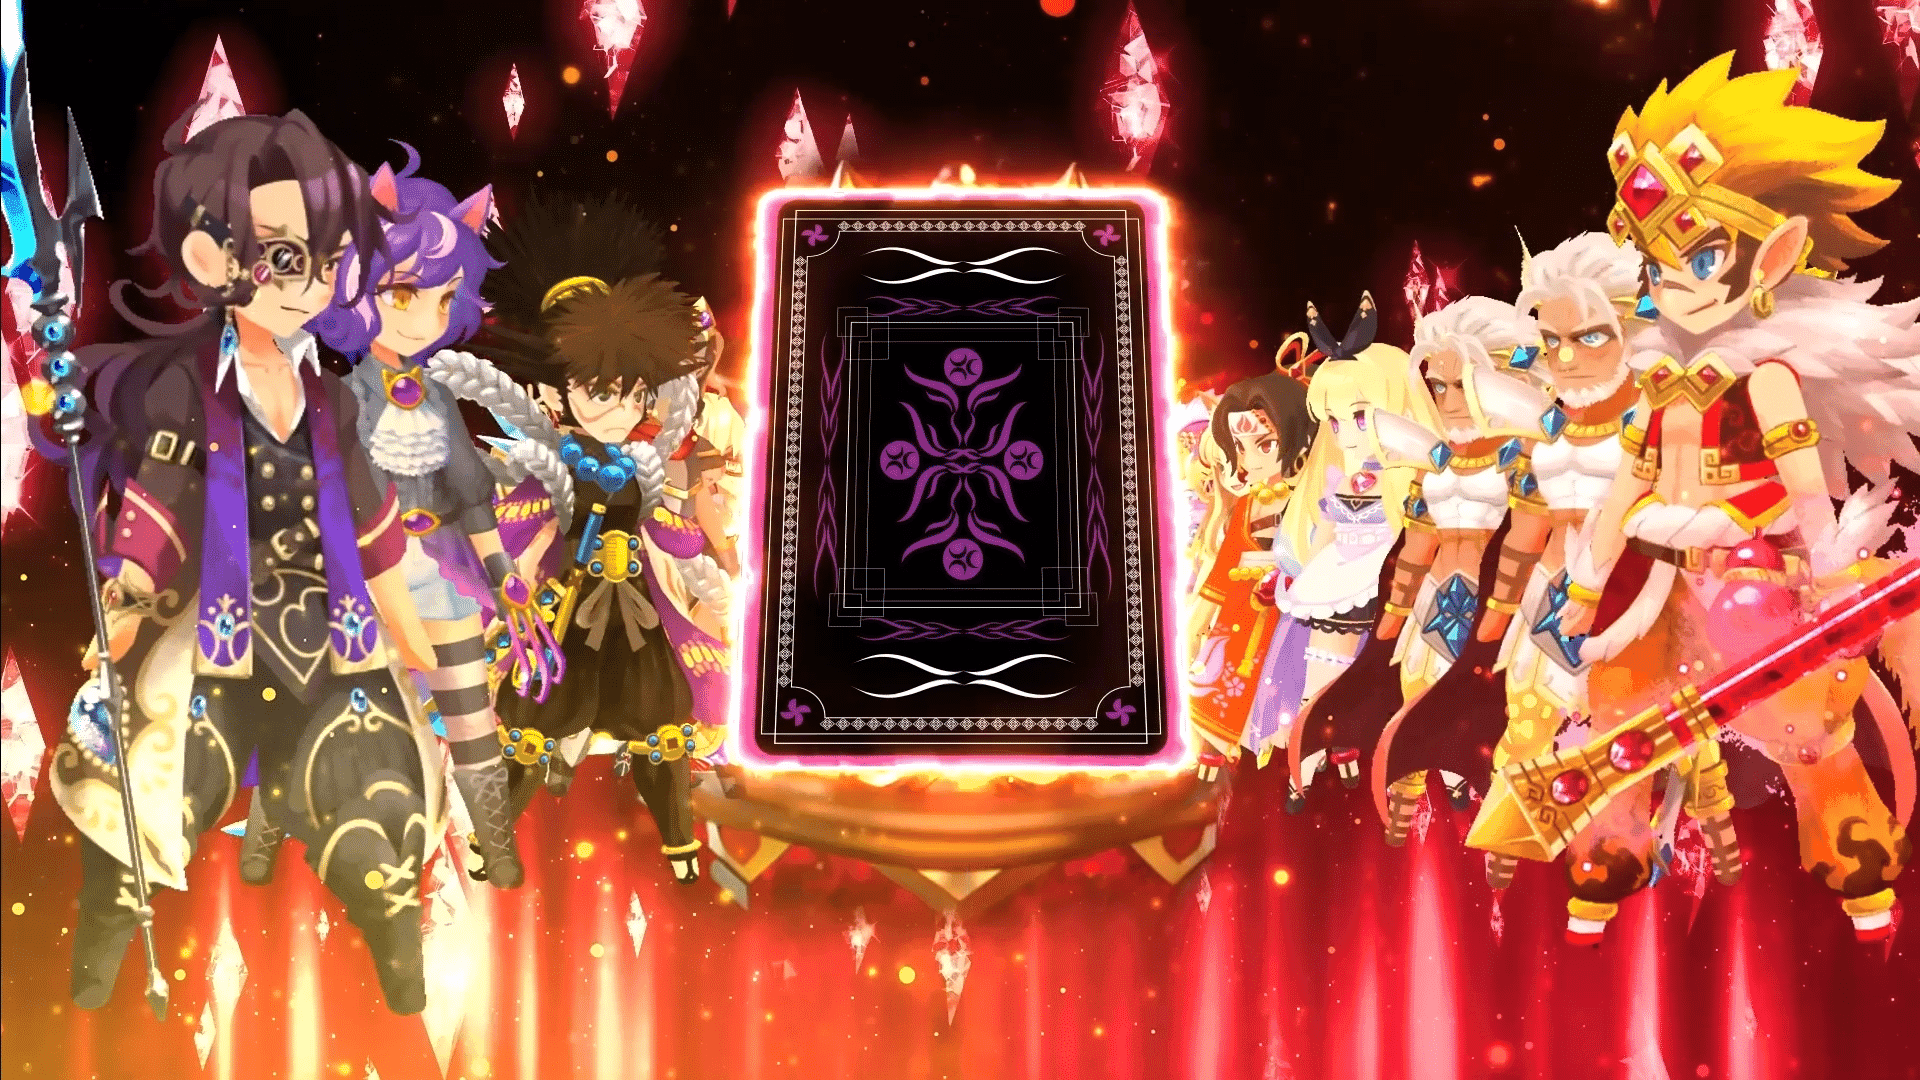 LIONA's Jewel Knights, a strategic RPG on the Binance Smart Chain, permits assembling a squad of up to five characters in a formation.